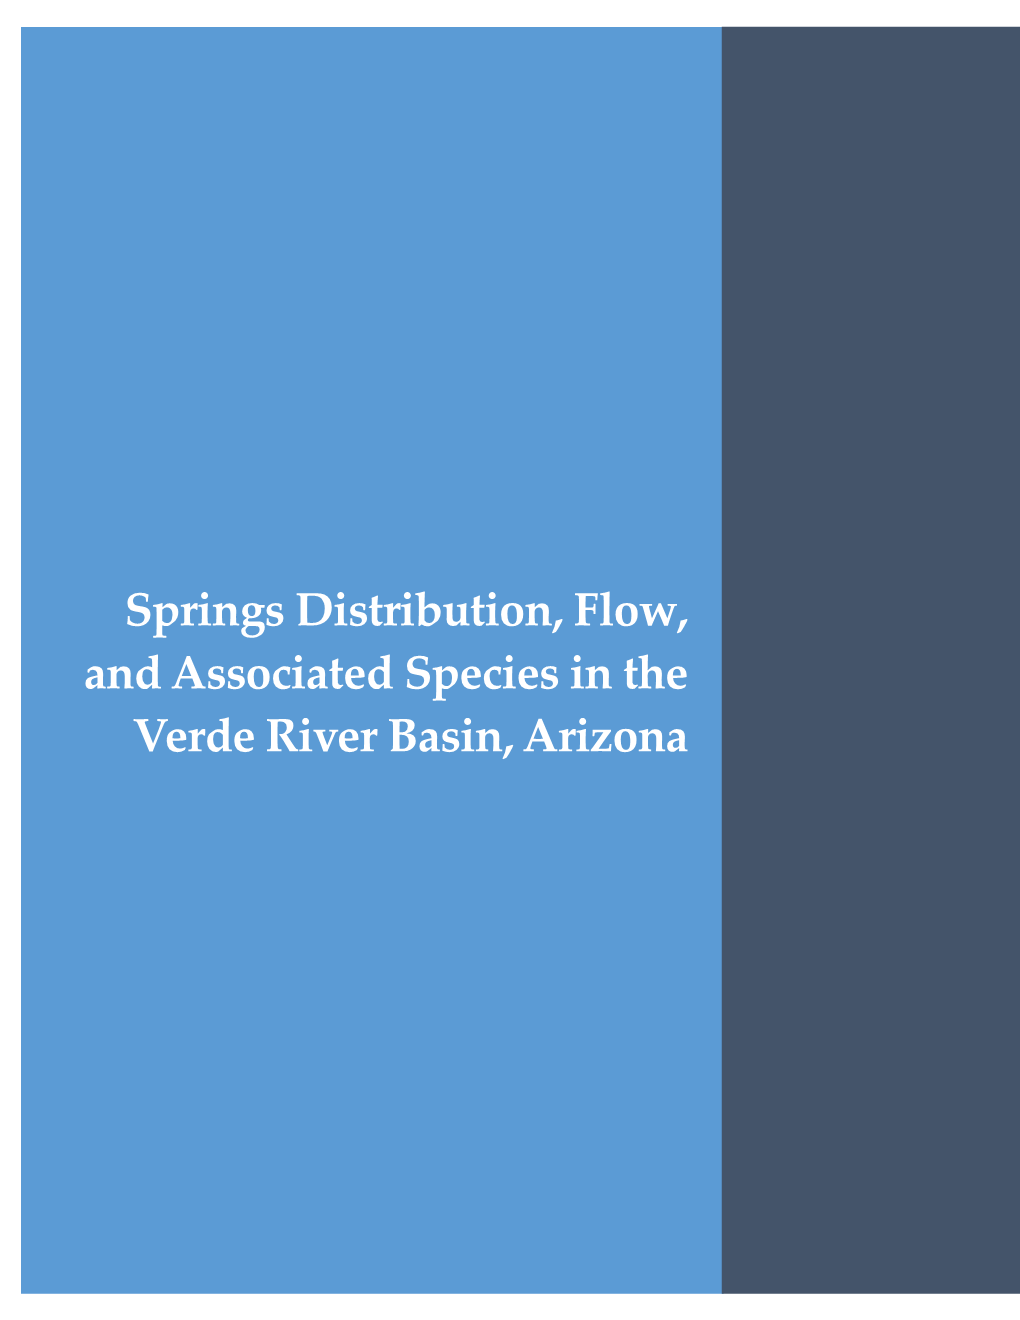 Springs Distribution, Flow, and Associated Species in the Verde River Basin, Arizona